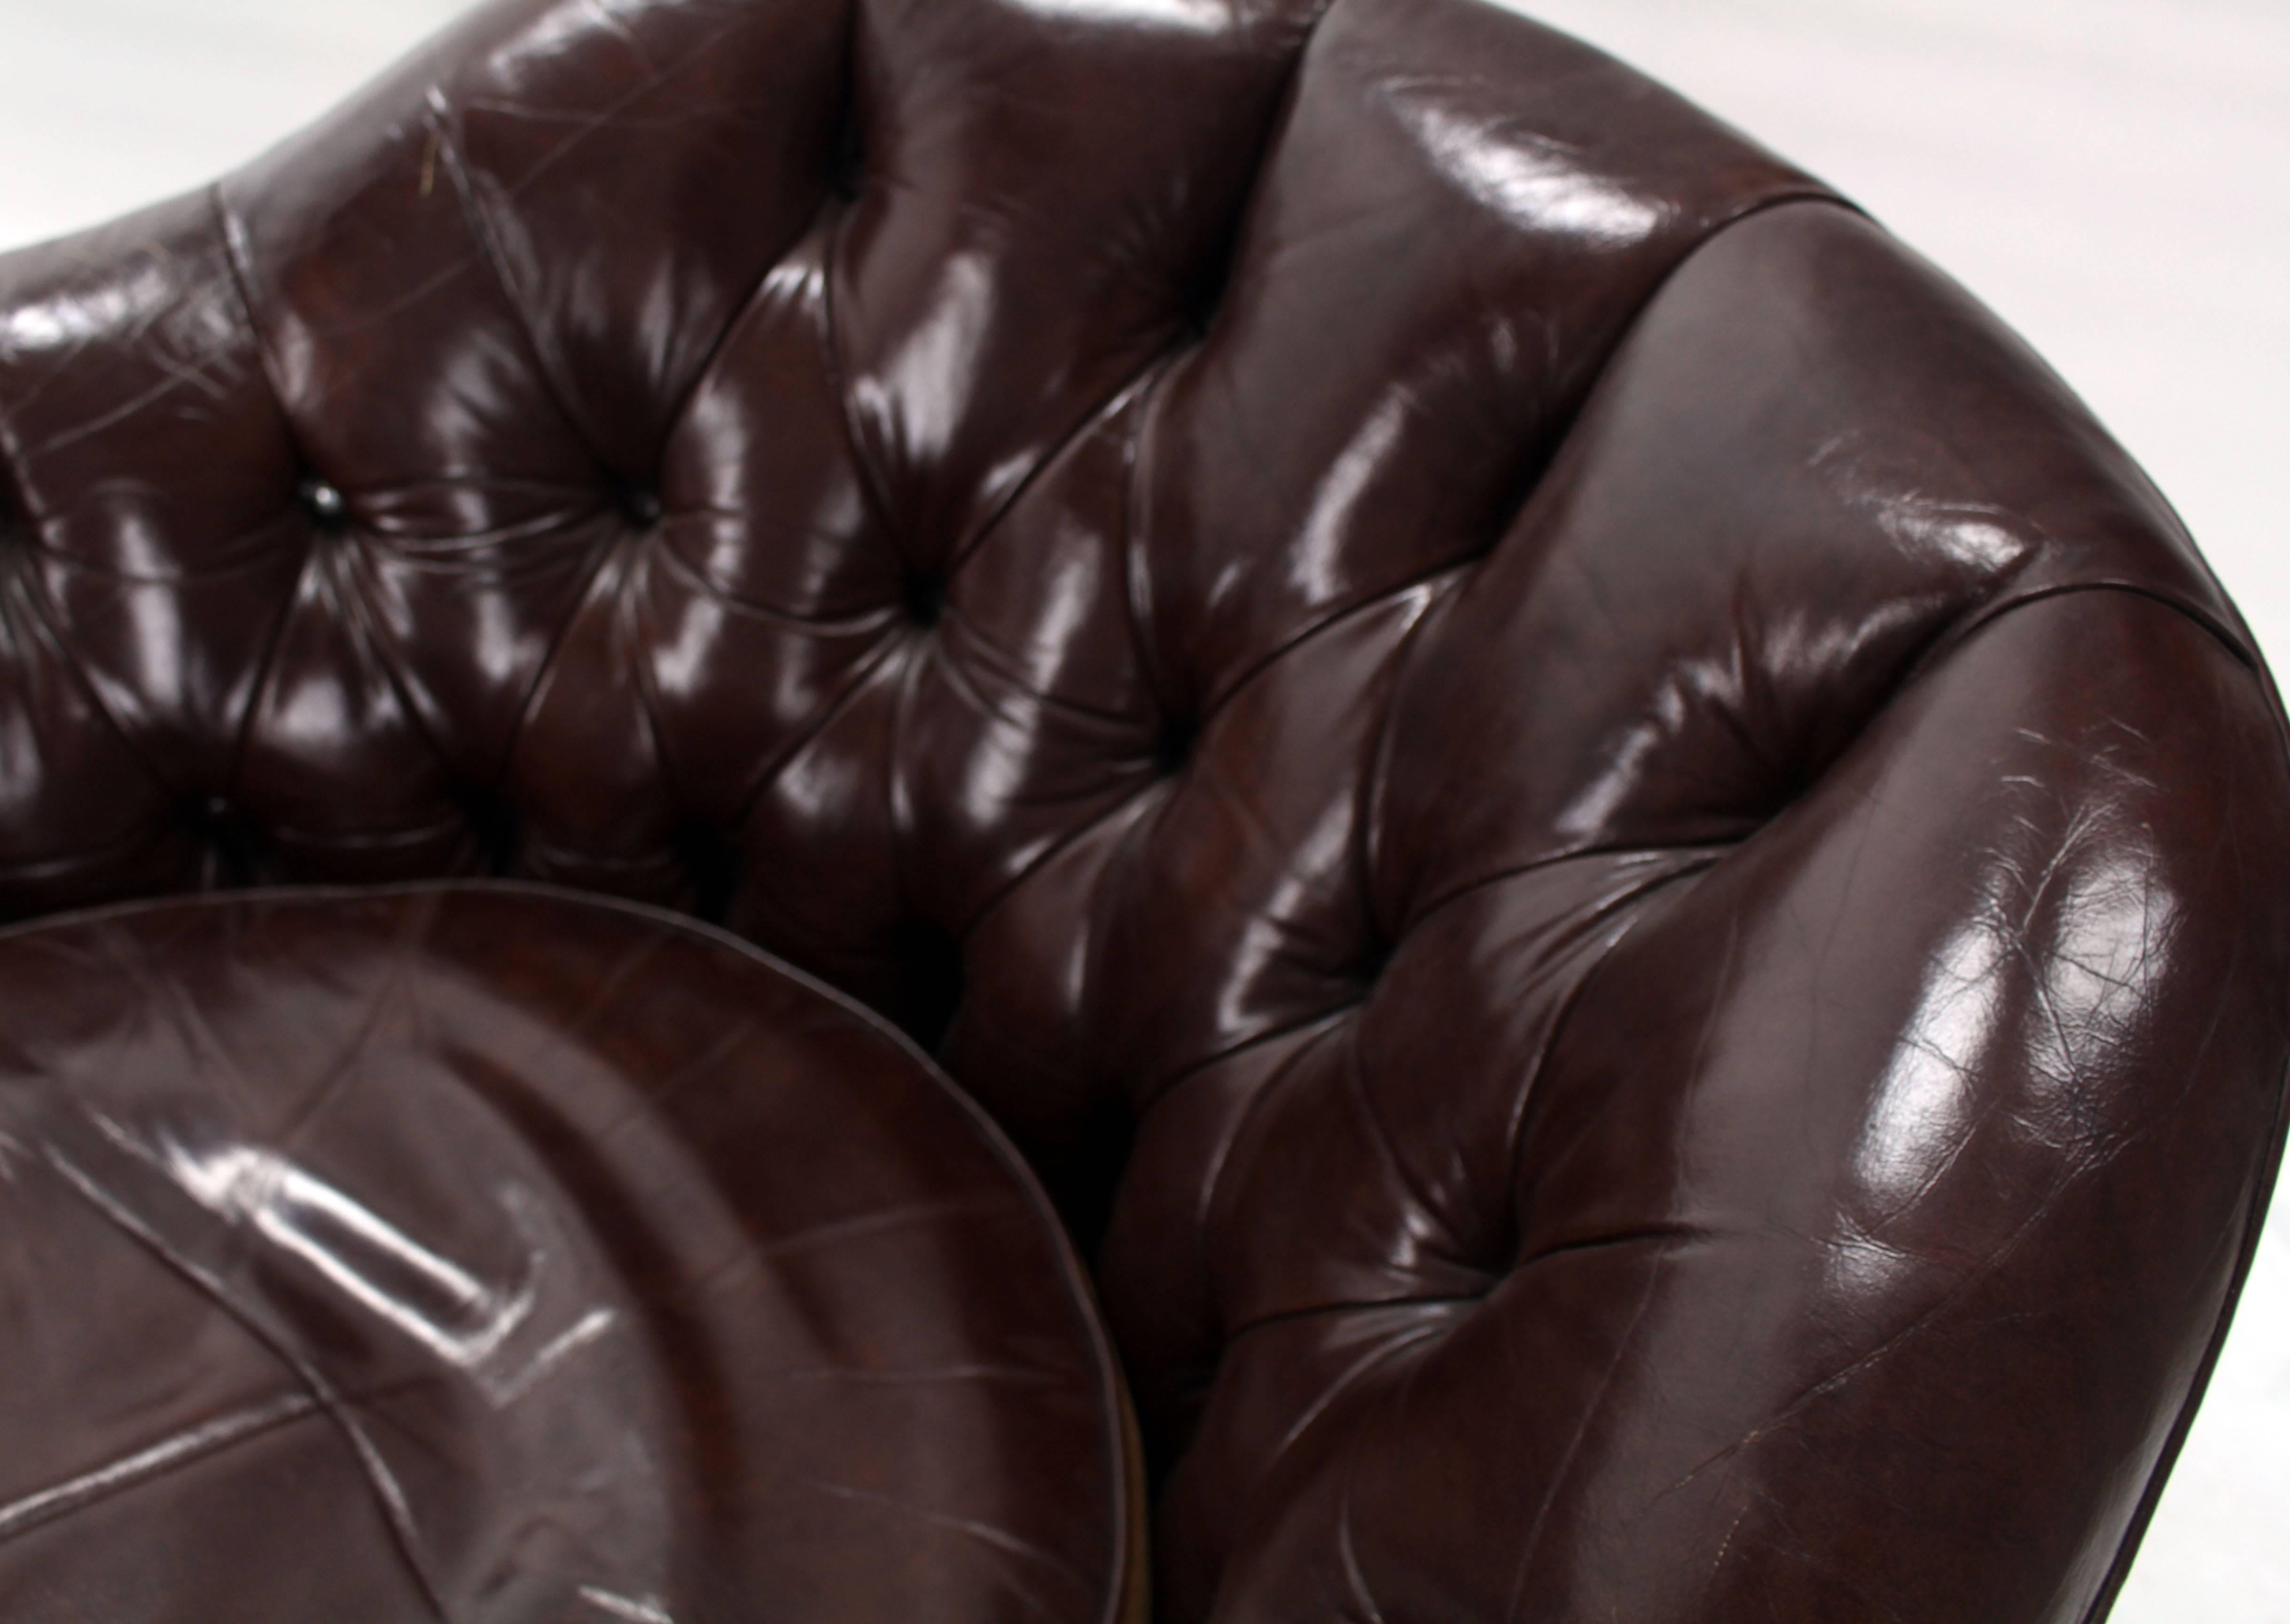 Mid-Century Modern Pair of Brown Shiny Leather Swivel Chairs Tufted Chesterfield Backs Nice Wear